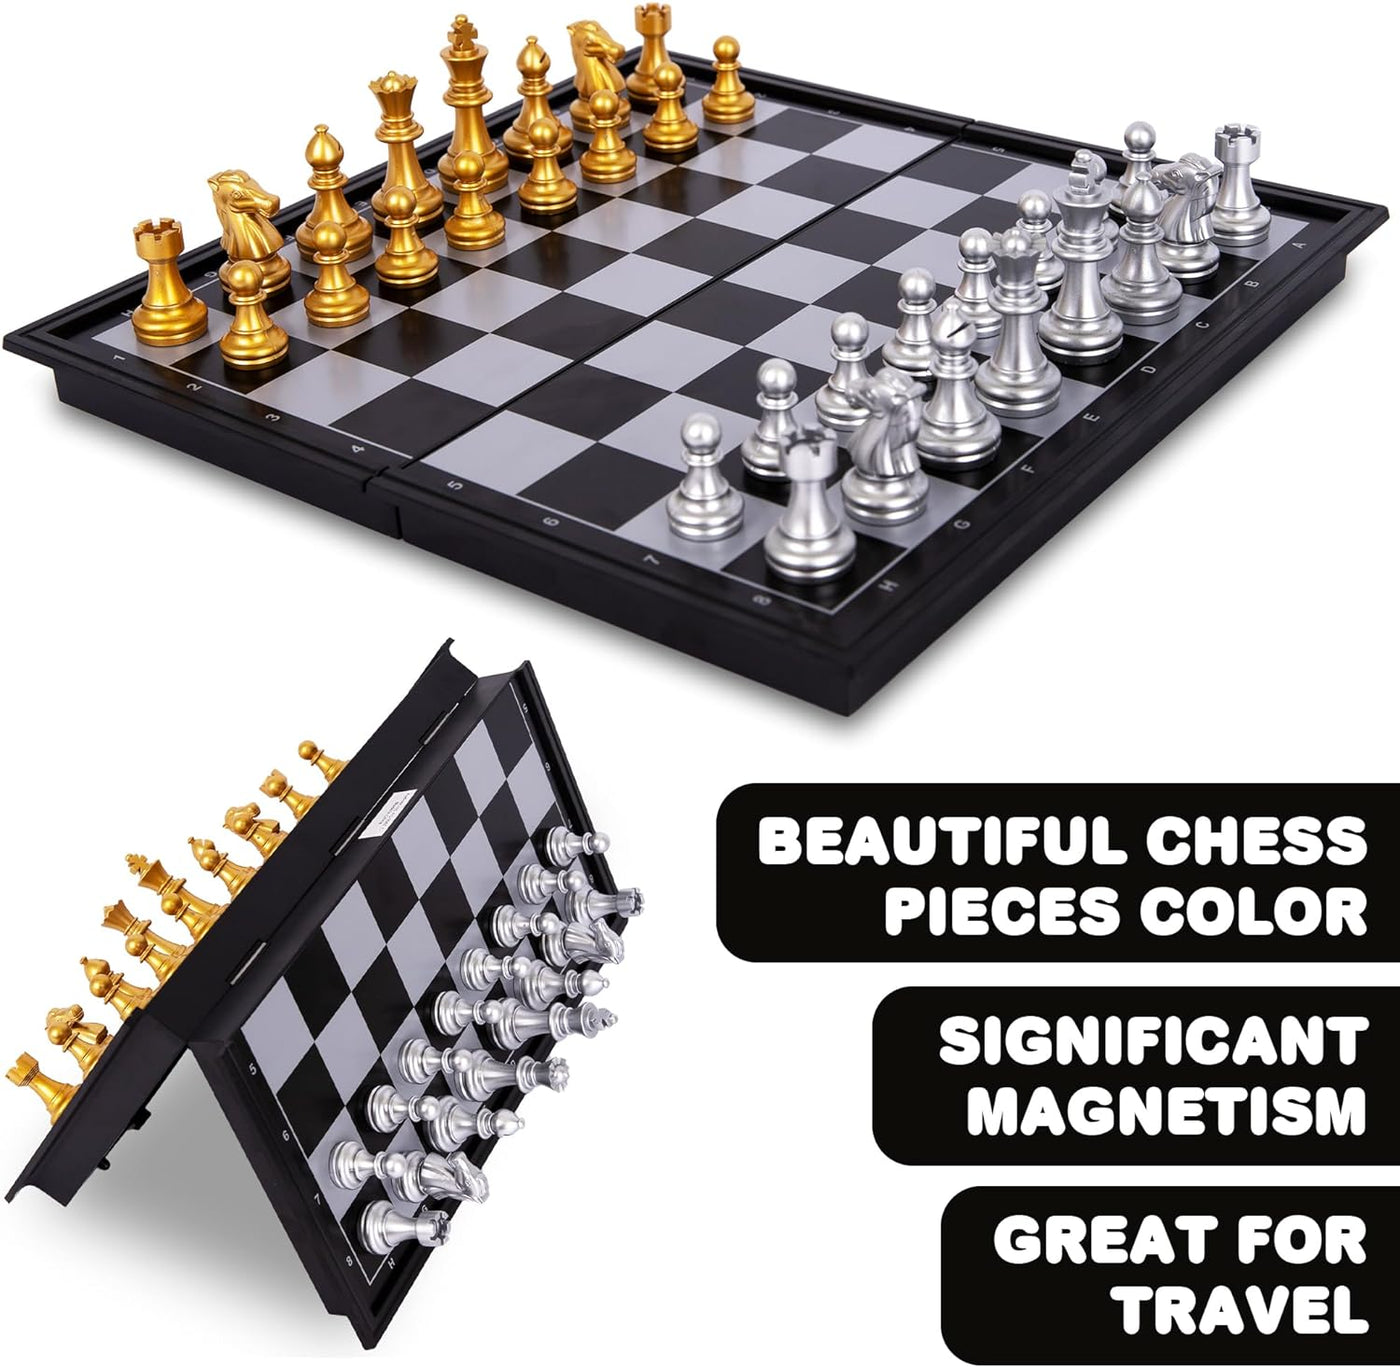 Gamie 3 in 1 Magnetic Travel Chess Set - Portable Chess, Checkers, Backgammon Set - 9 Inch Magnetic Chess Board for Road Trips - Travel Games for Kids and Adults - Gift Idea for Ages 3 and Up